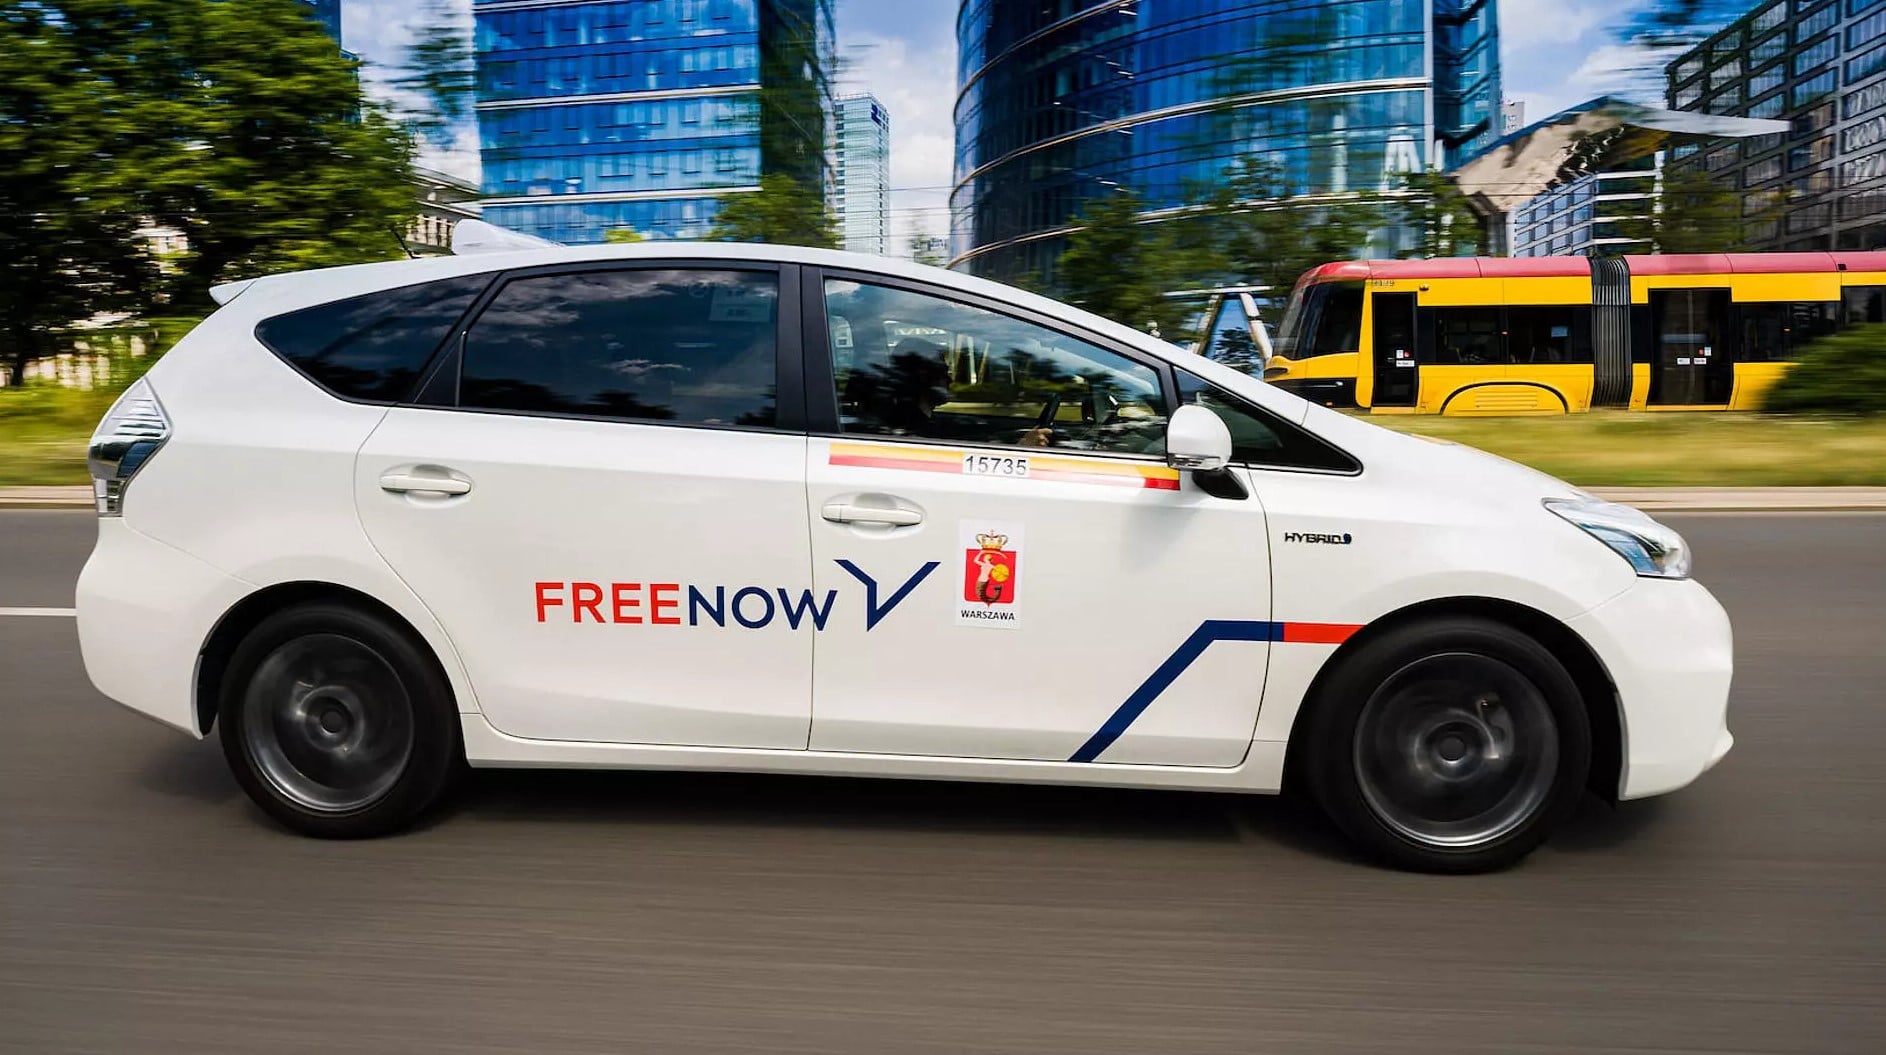 FREE NOW expands its activities to other cities